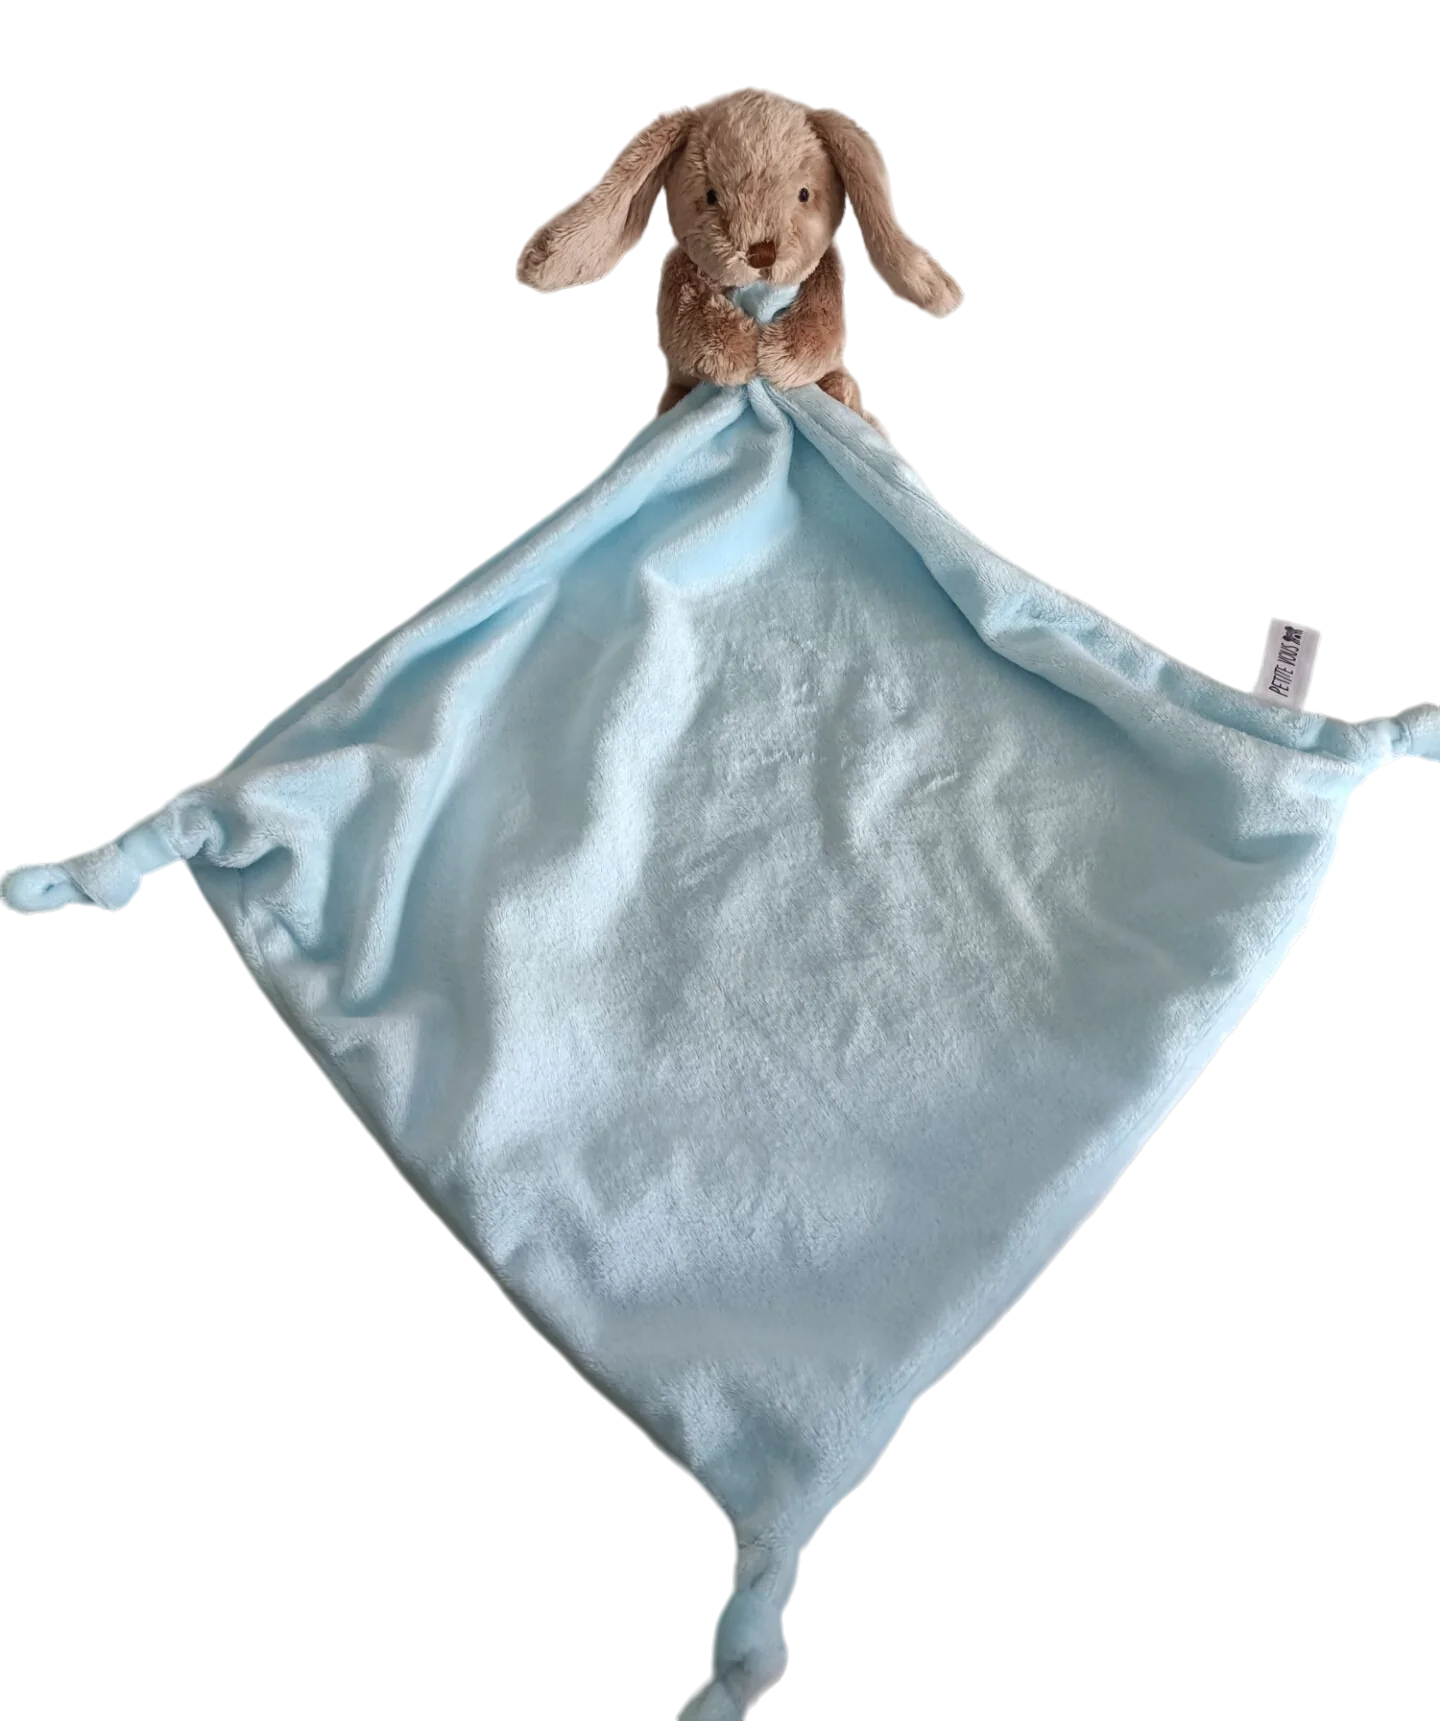 Petite Vous - Benny the Bunny with Blue Comfort Blanket